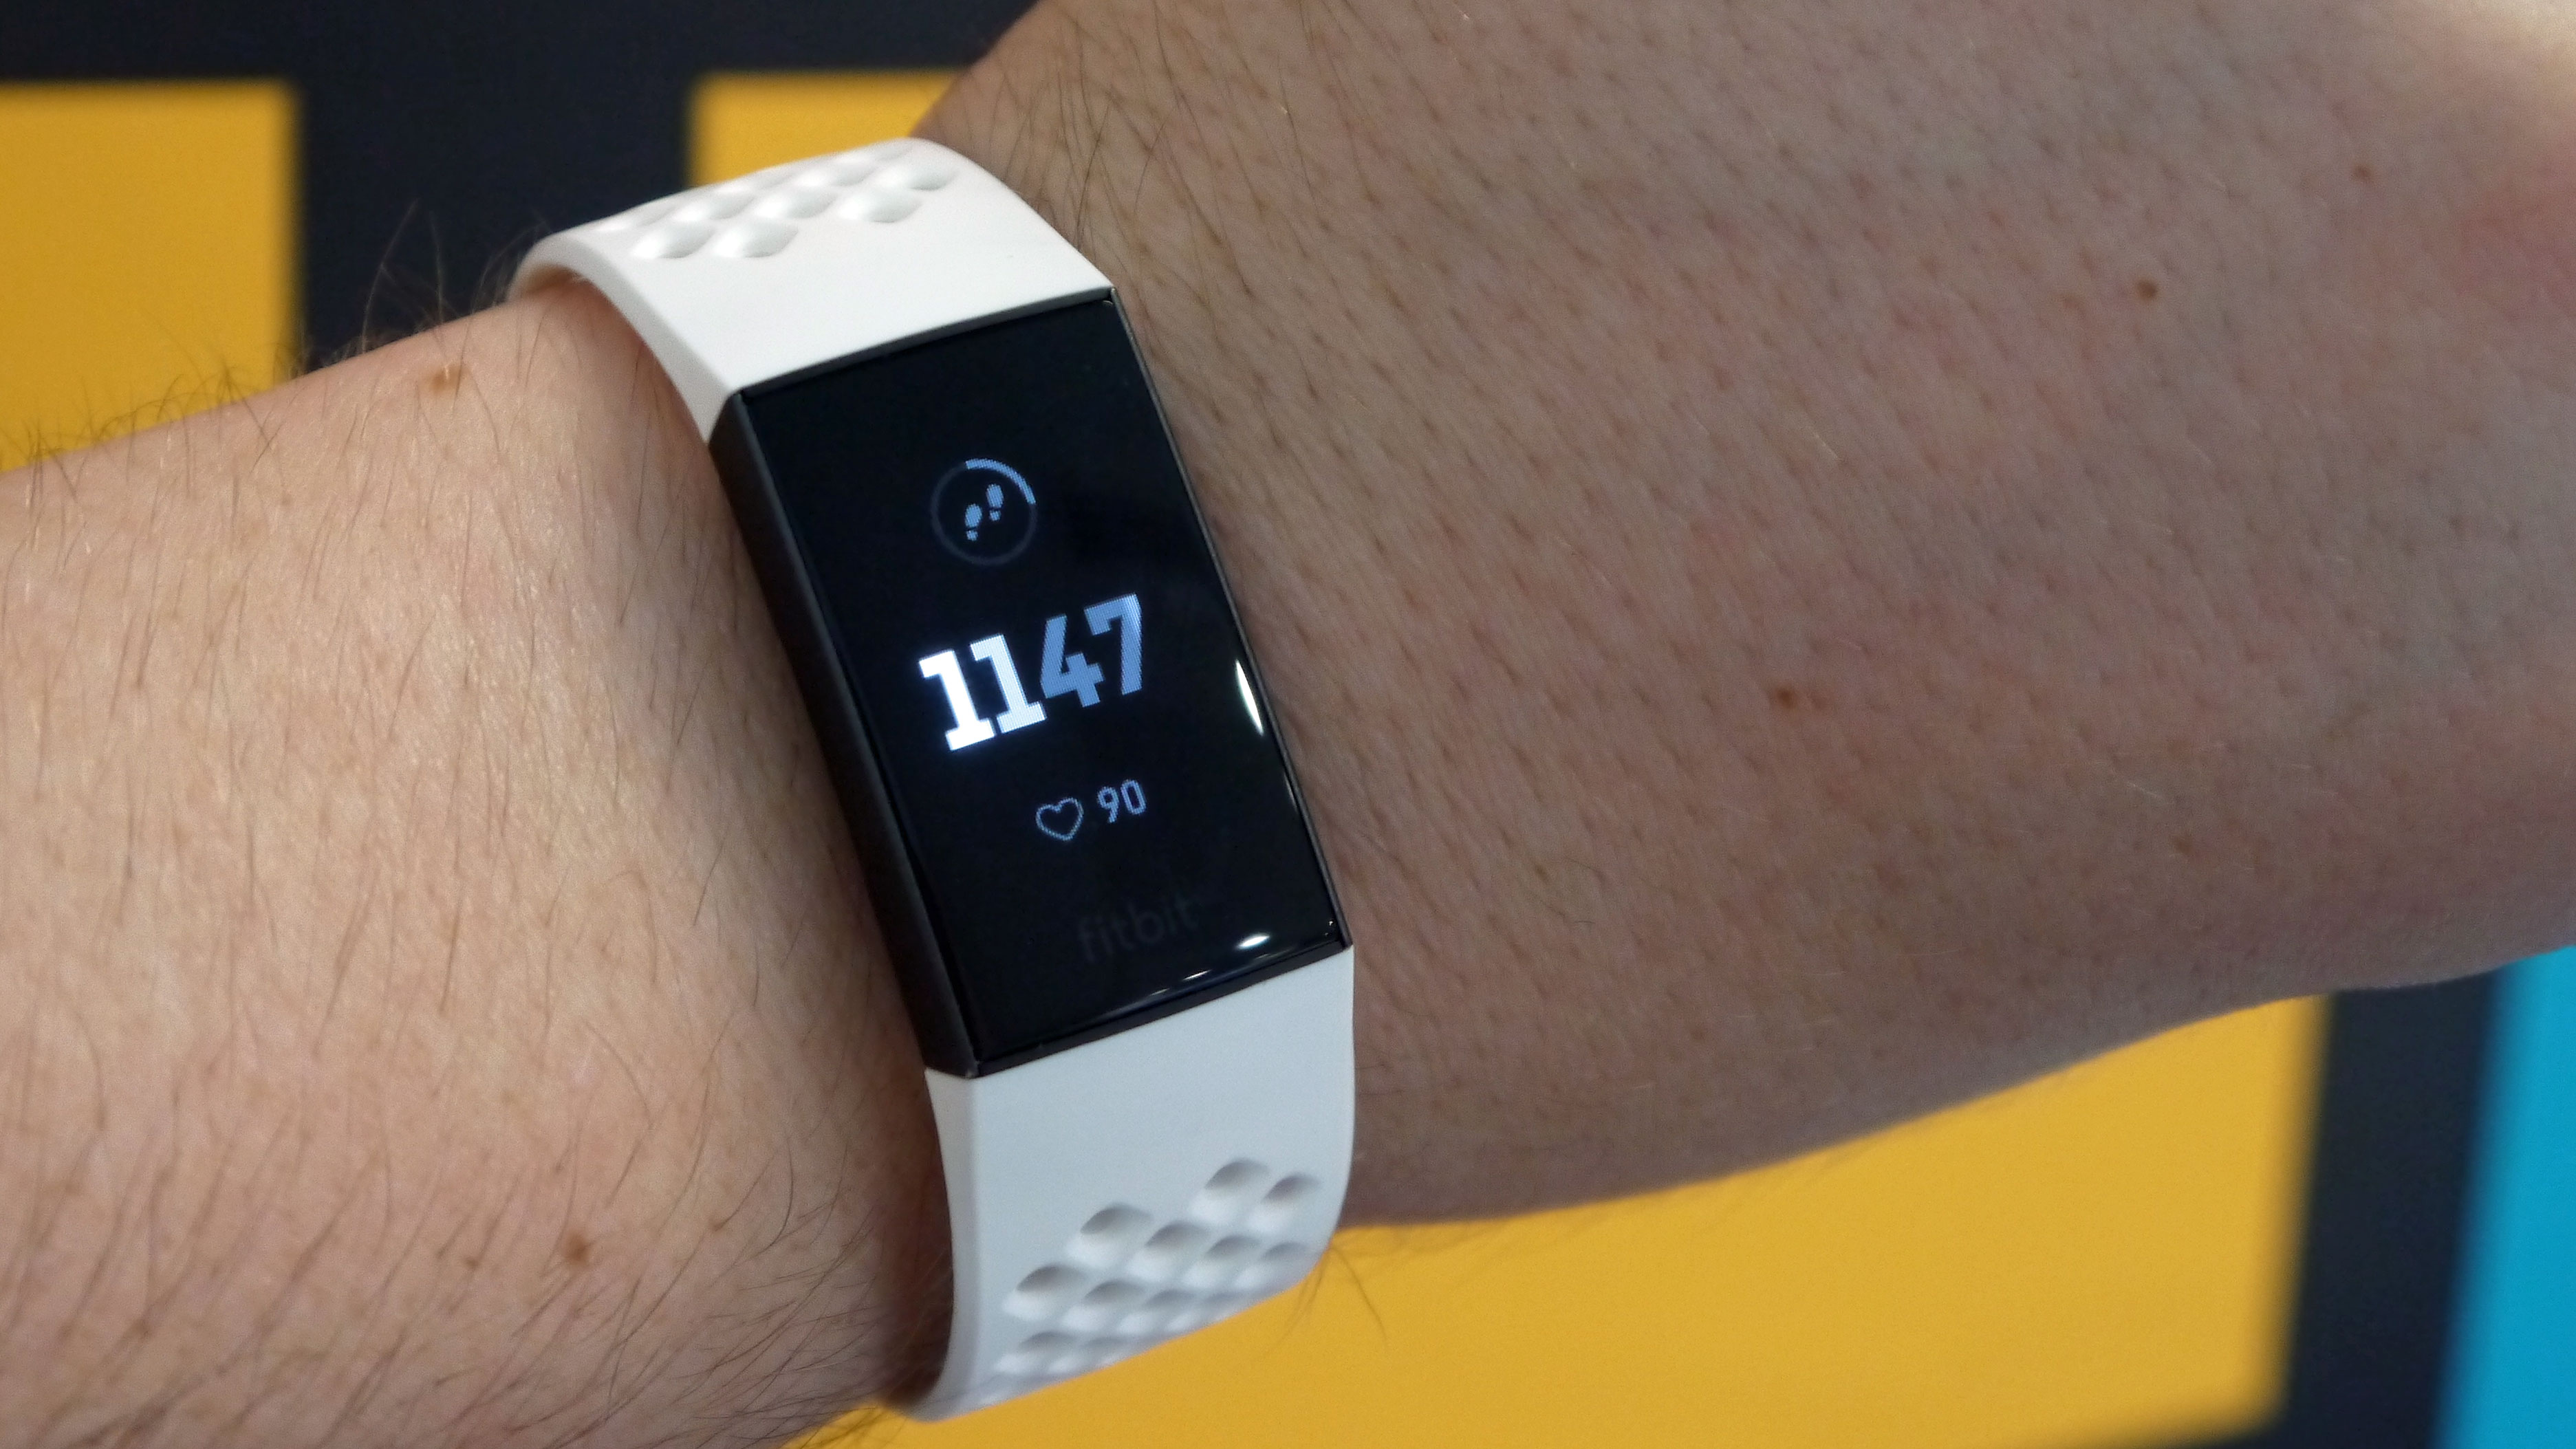 fitbit charge 3 white sports band